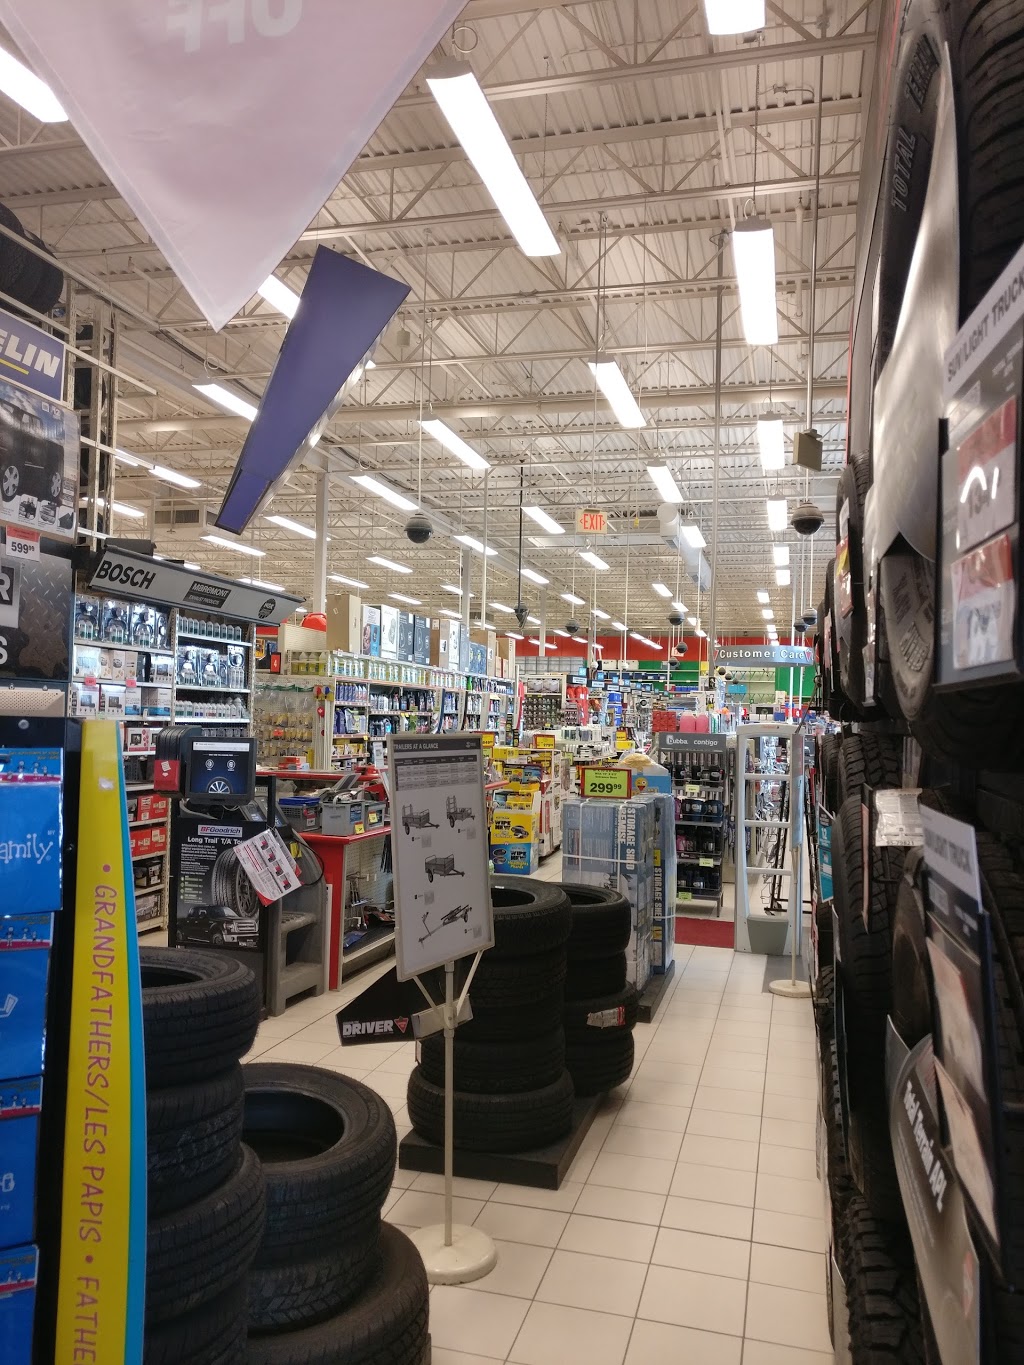 Canadian Tire - Exeter, ON | department store | 100 Thames Rd E, Exeter, ON N0M 1S3, Canada | 5192350160 OR +1 519-235-0160